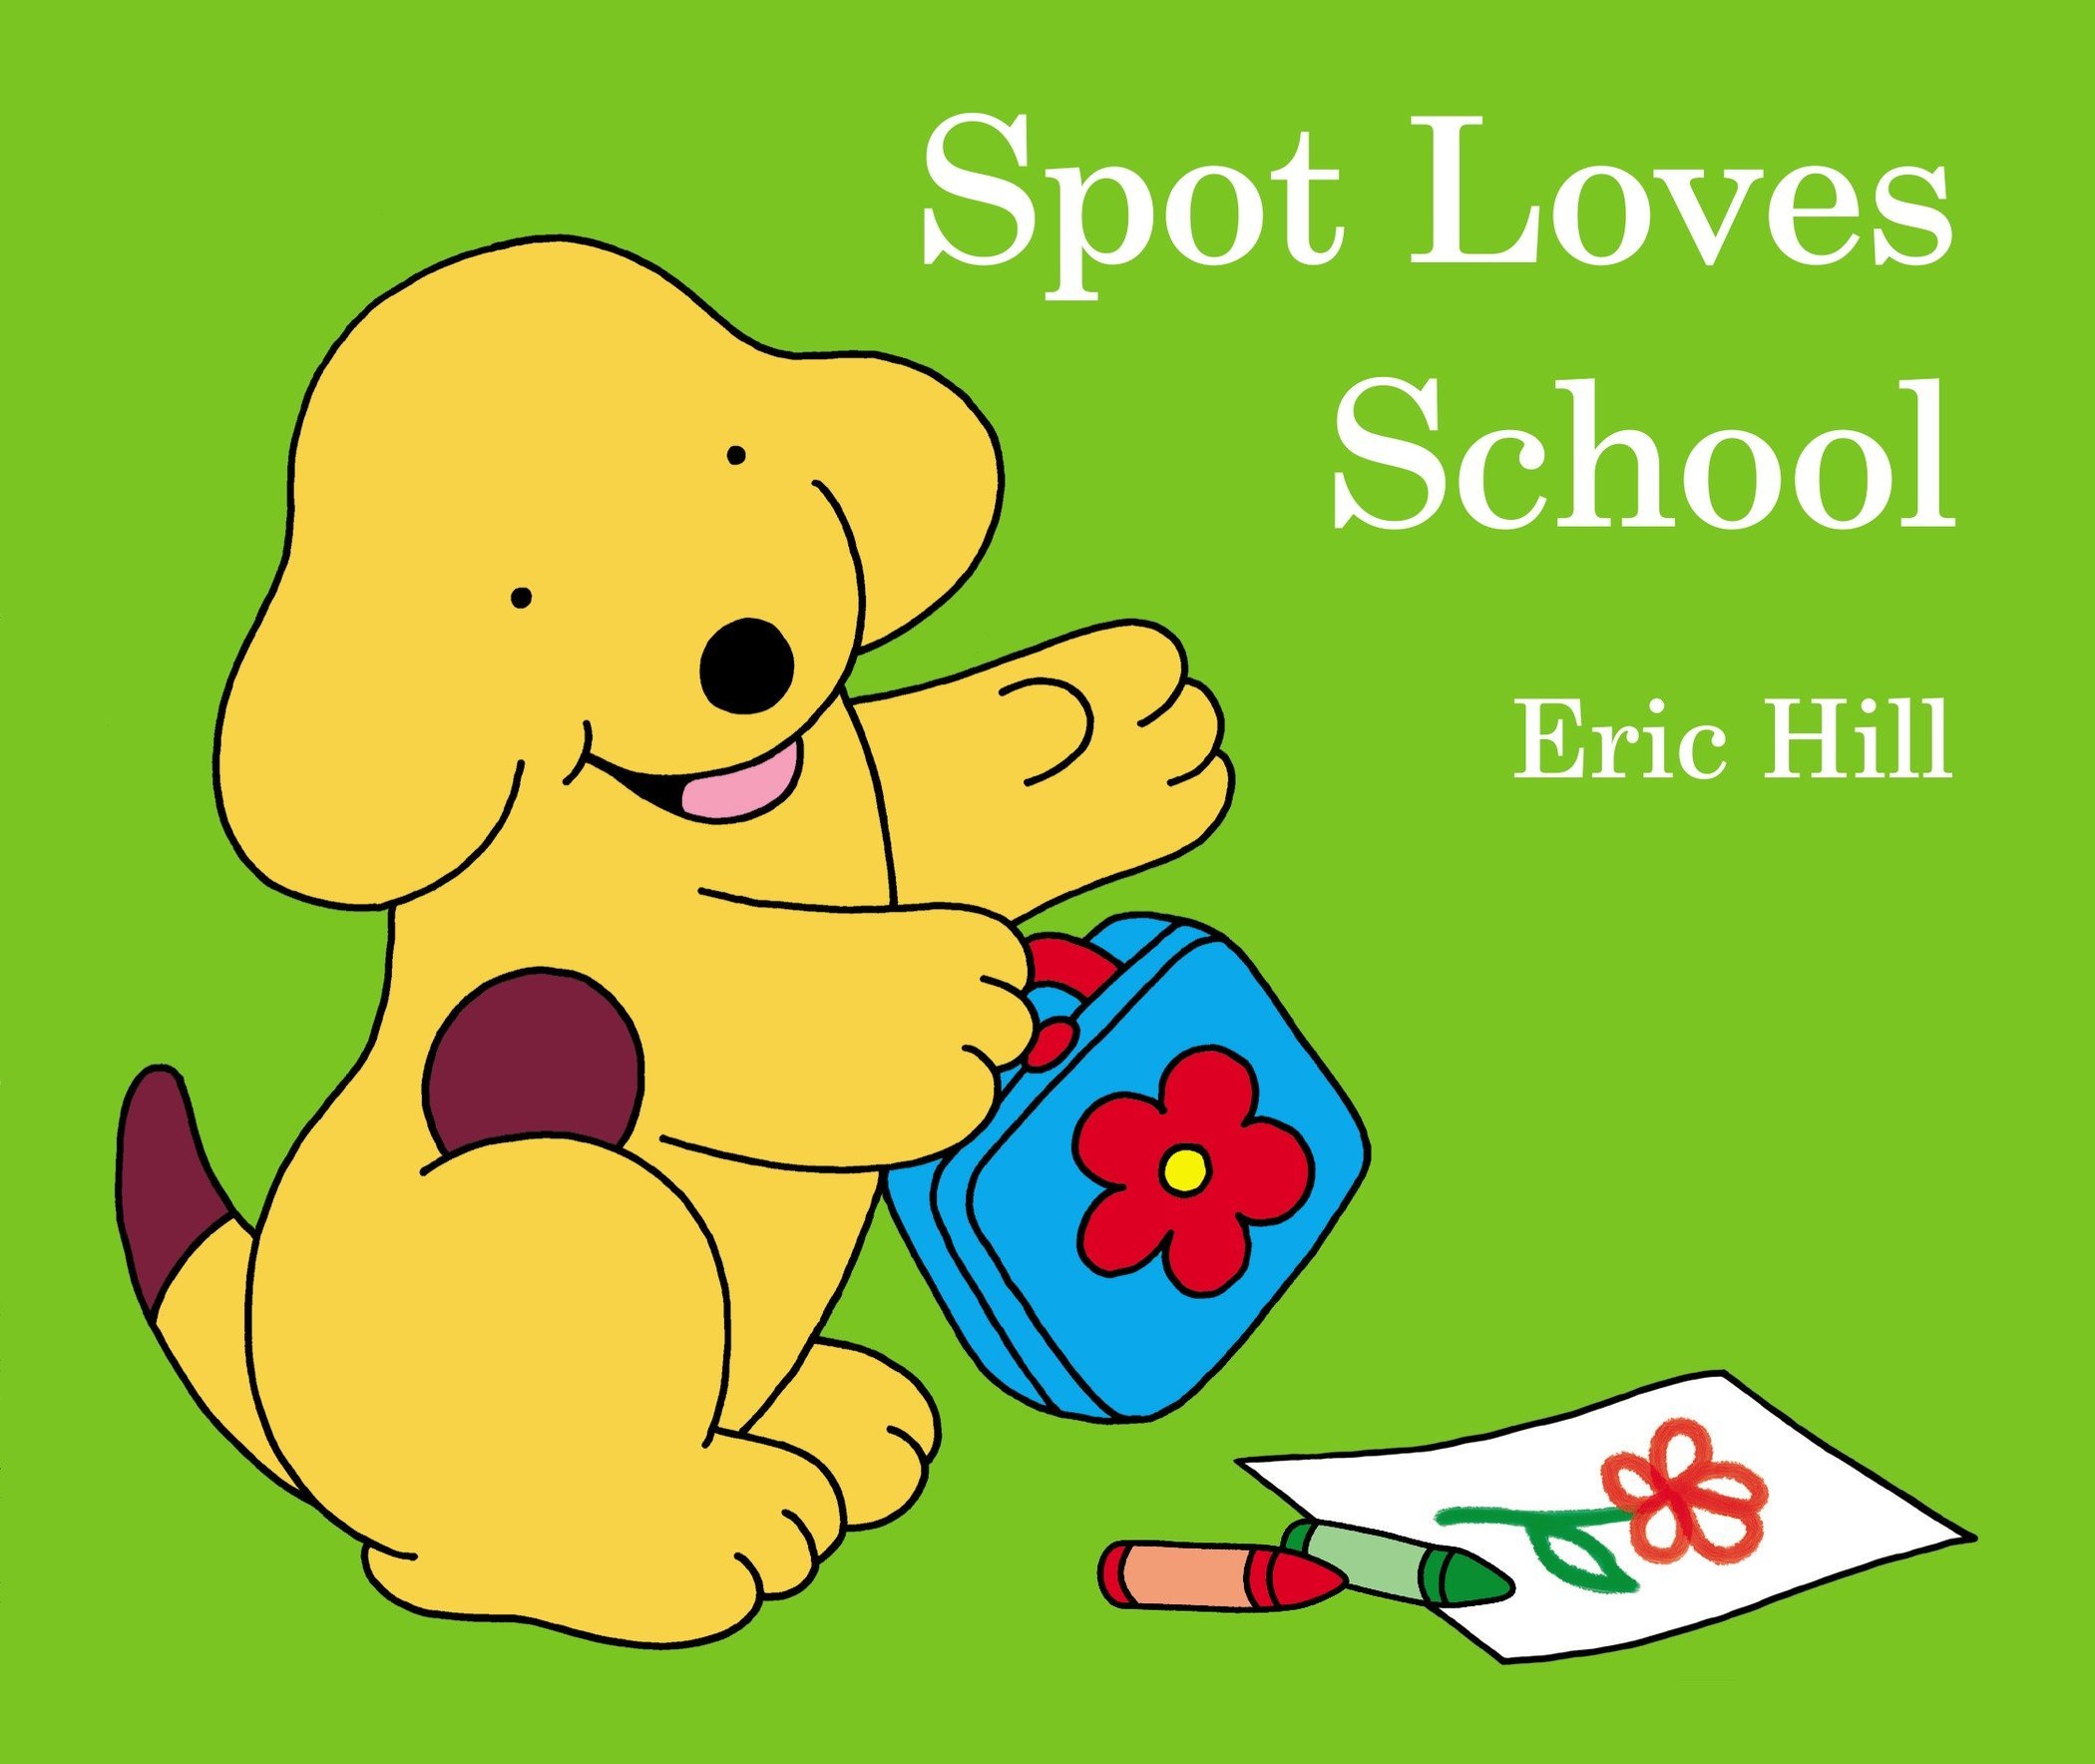 speech and language teaching concepts for Spot Loves School in speech therapy​